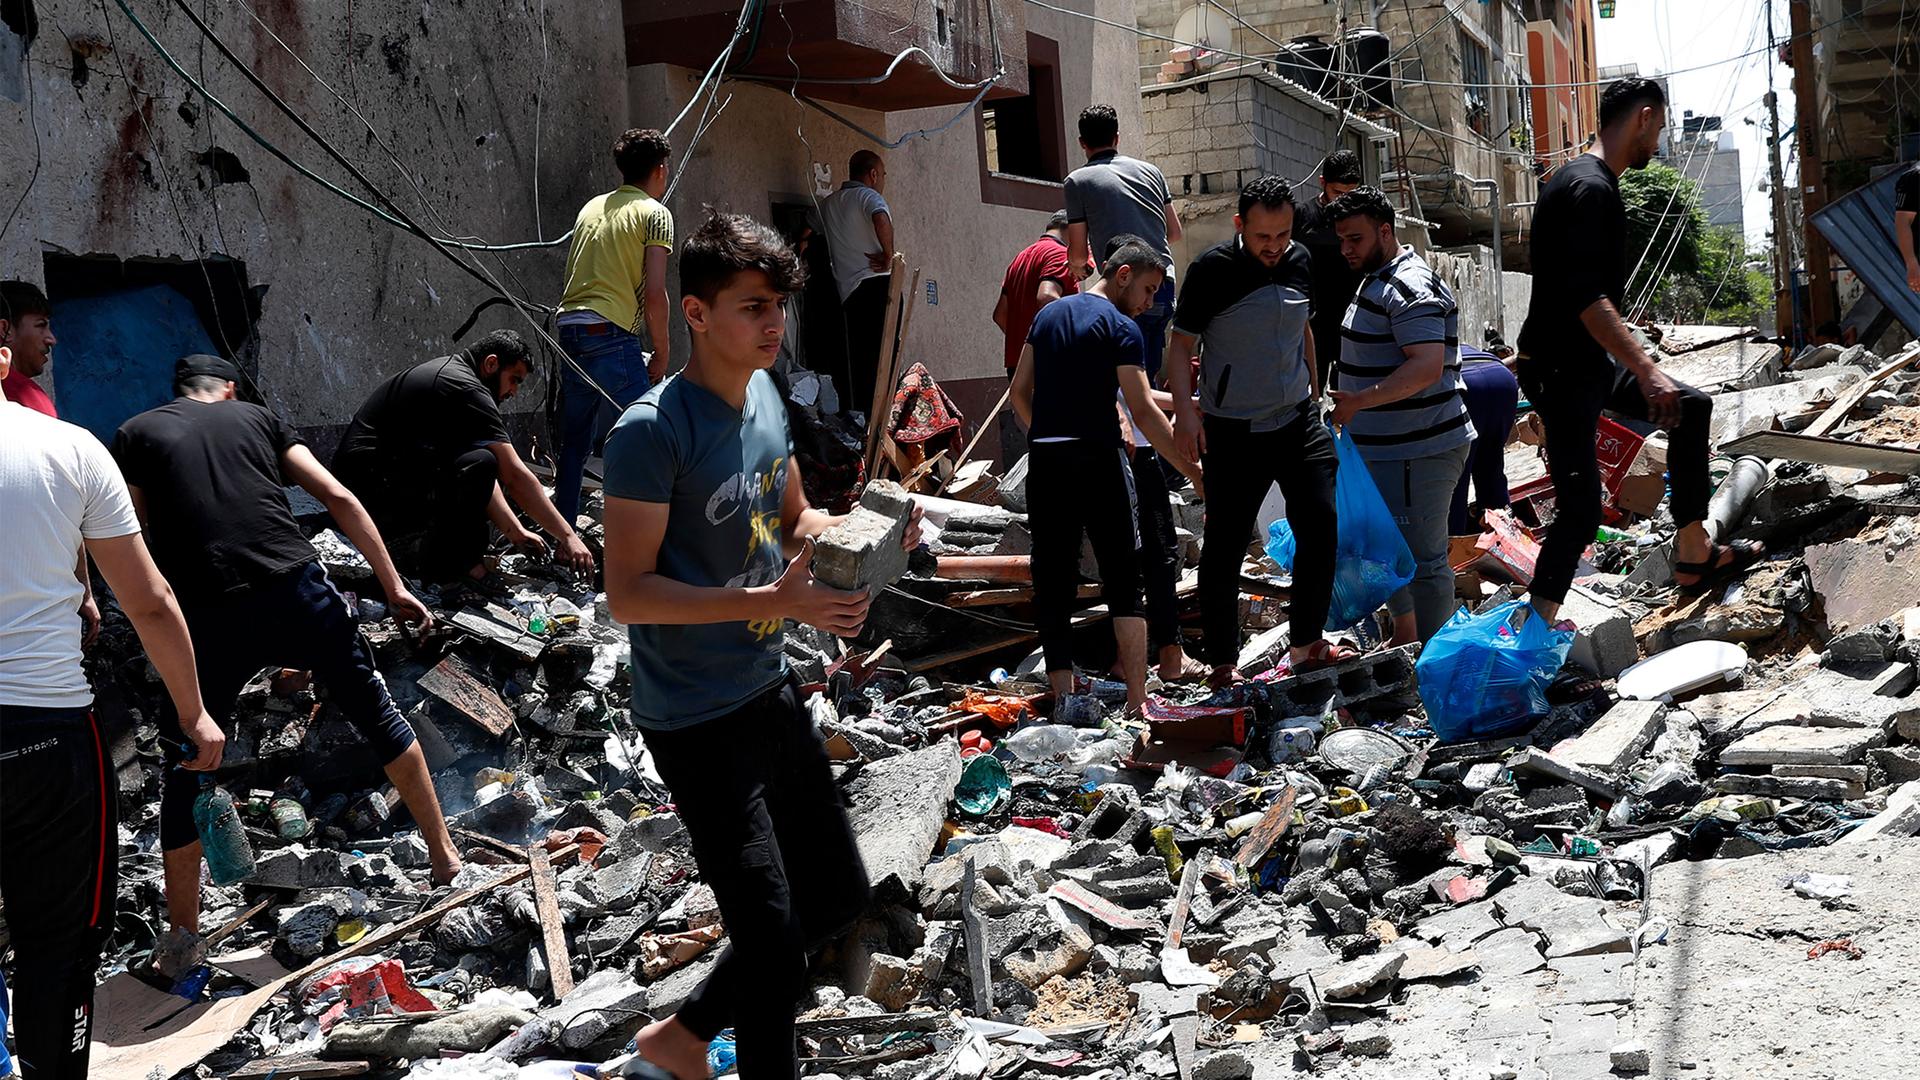 Young man in blue shirt lifts a piece of concrete as other men sift through rubble after an airstrike